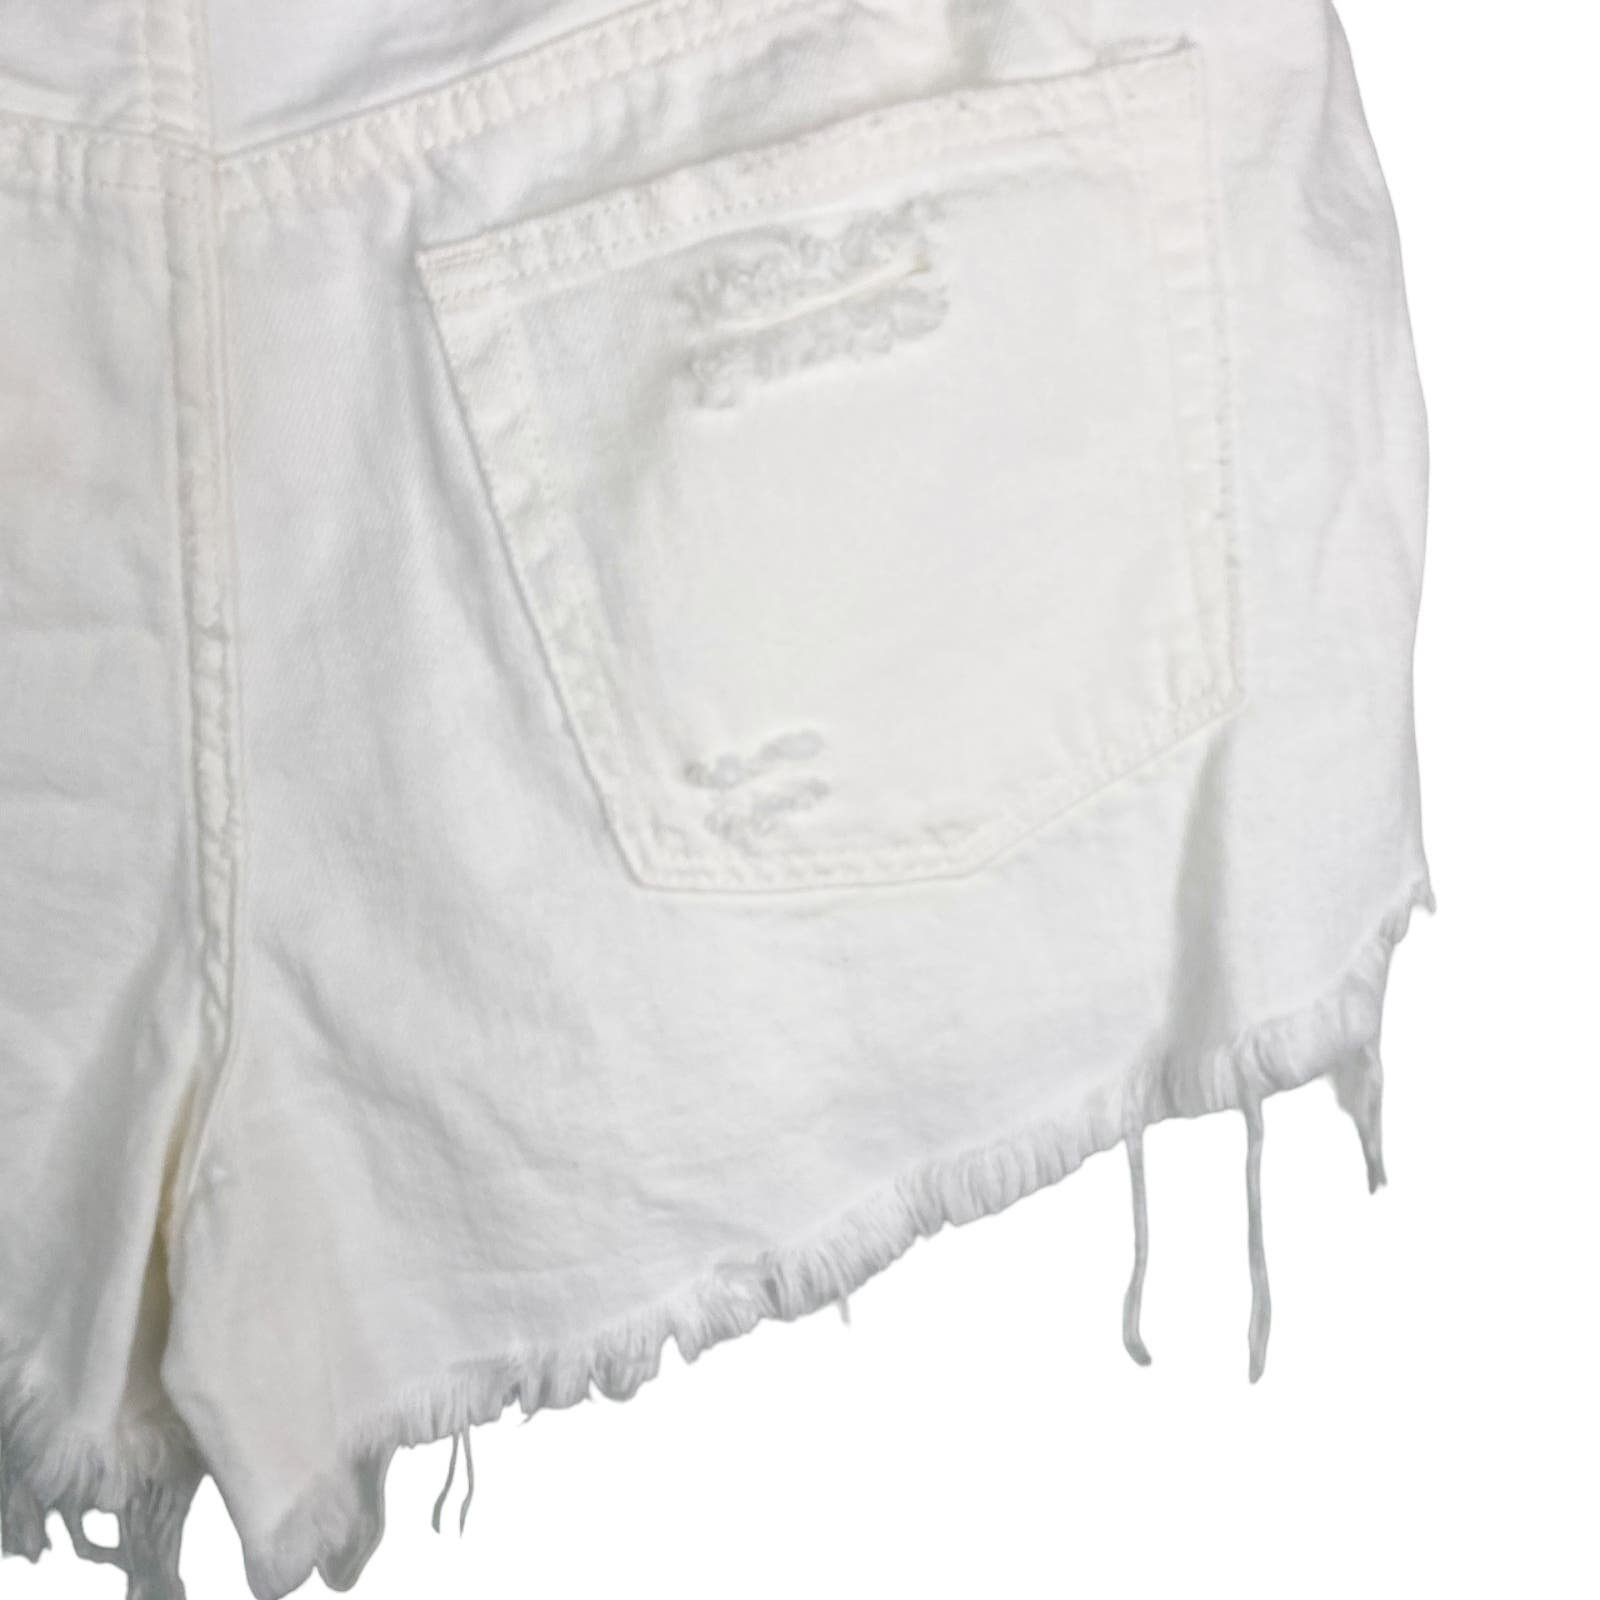 Special offer  Free People We The Free Loving Good Vibrations Cutoffs 31 Spring White New O48yZbkBT all for you